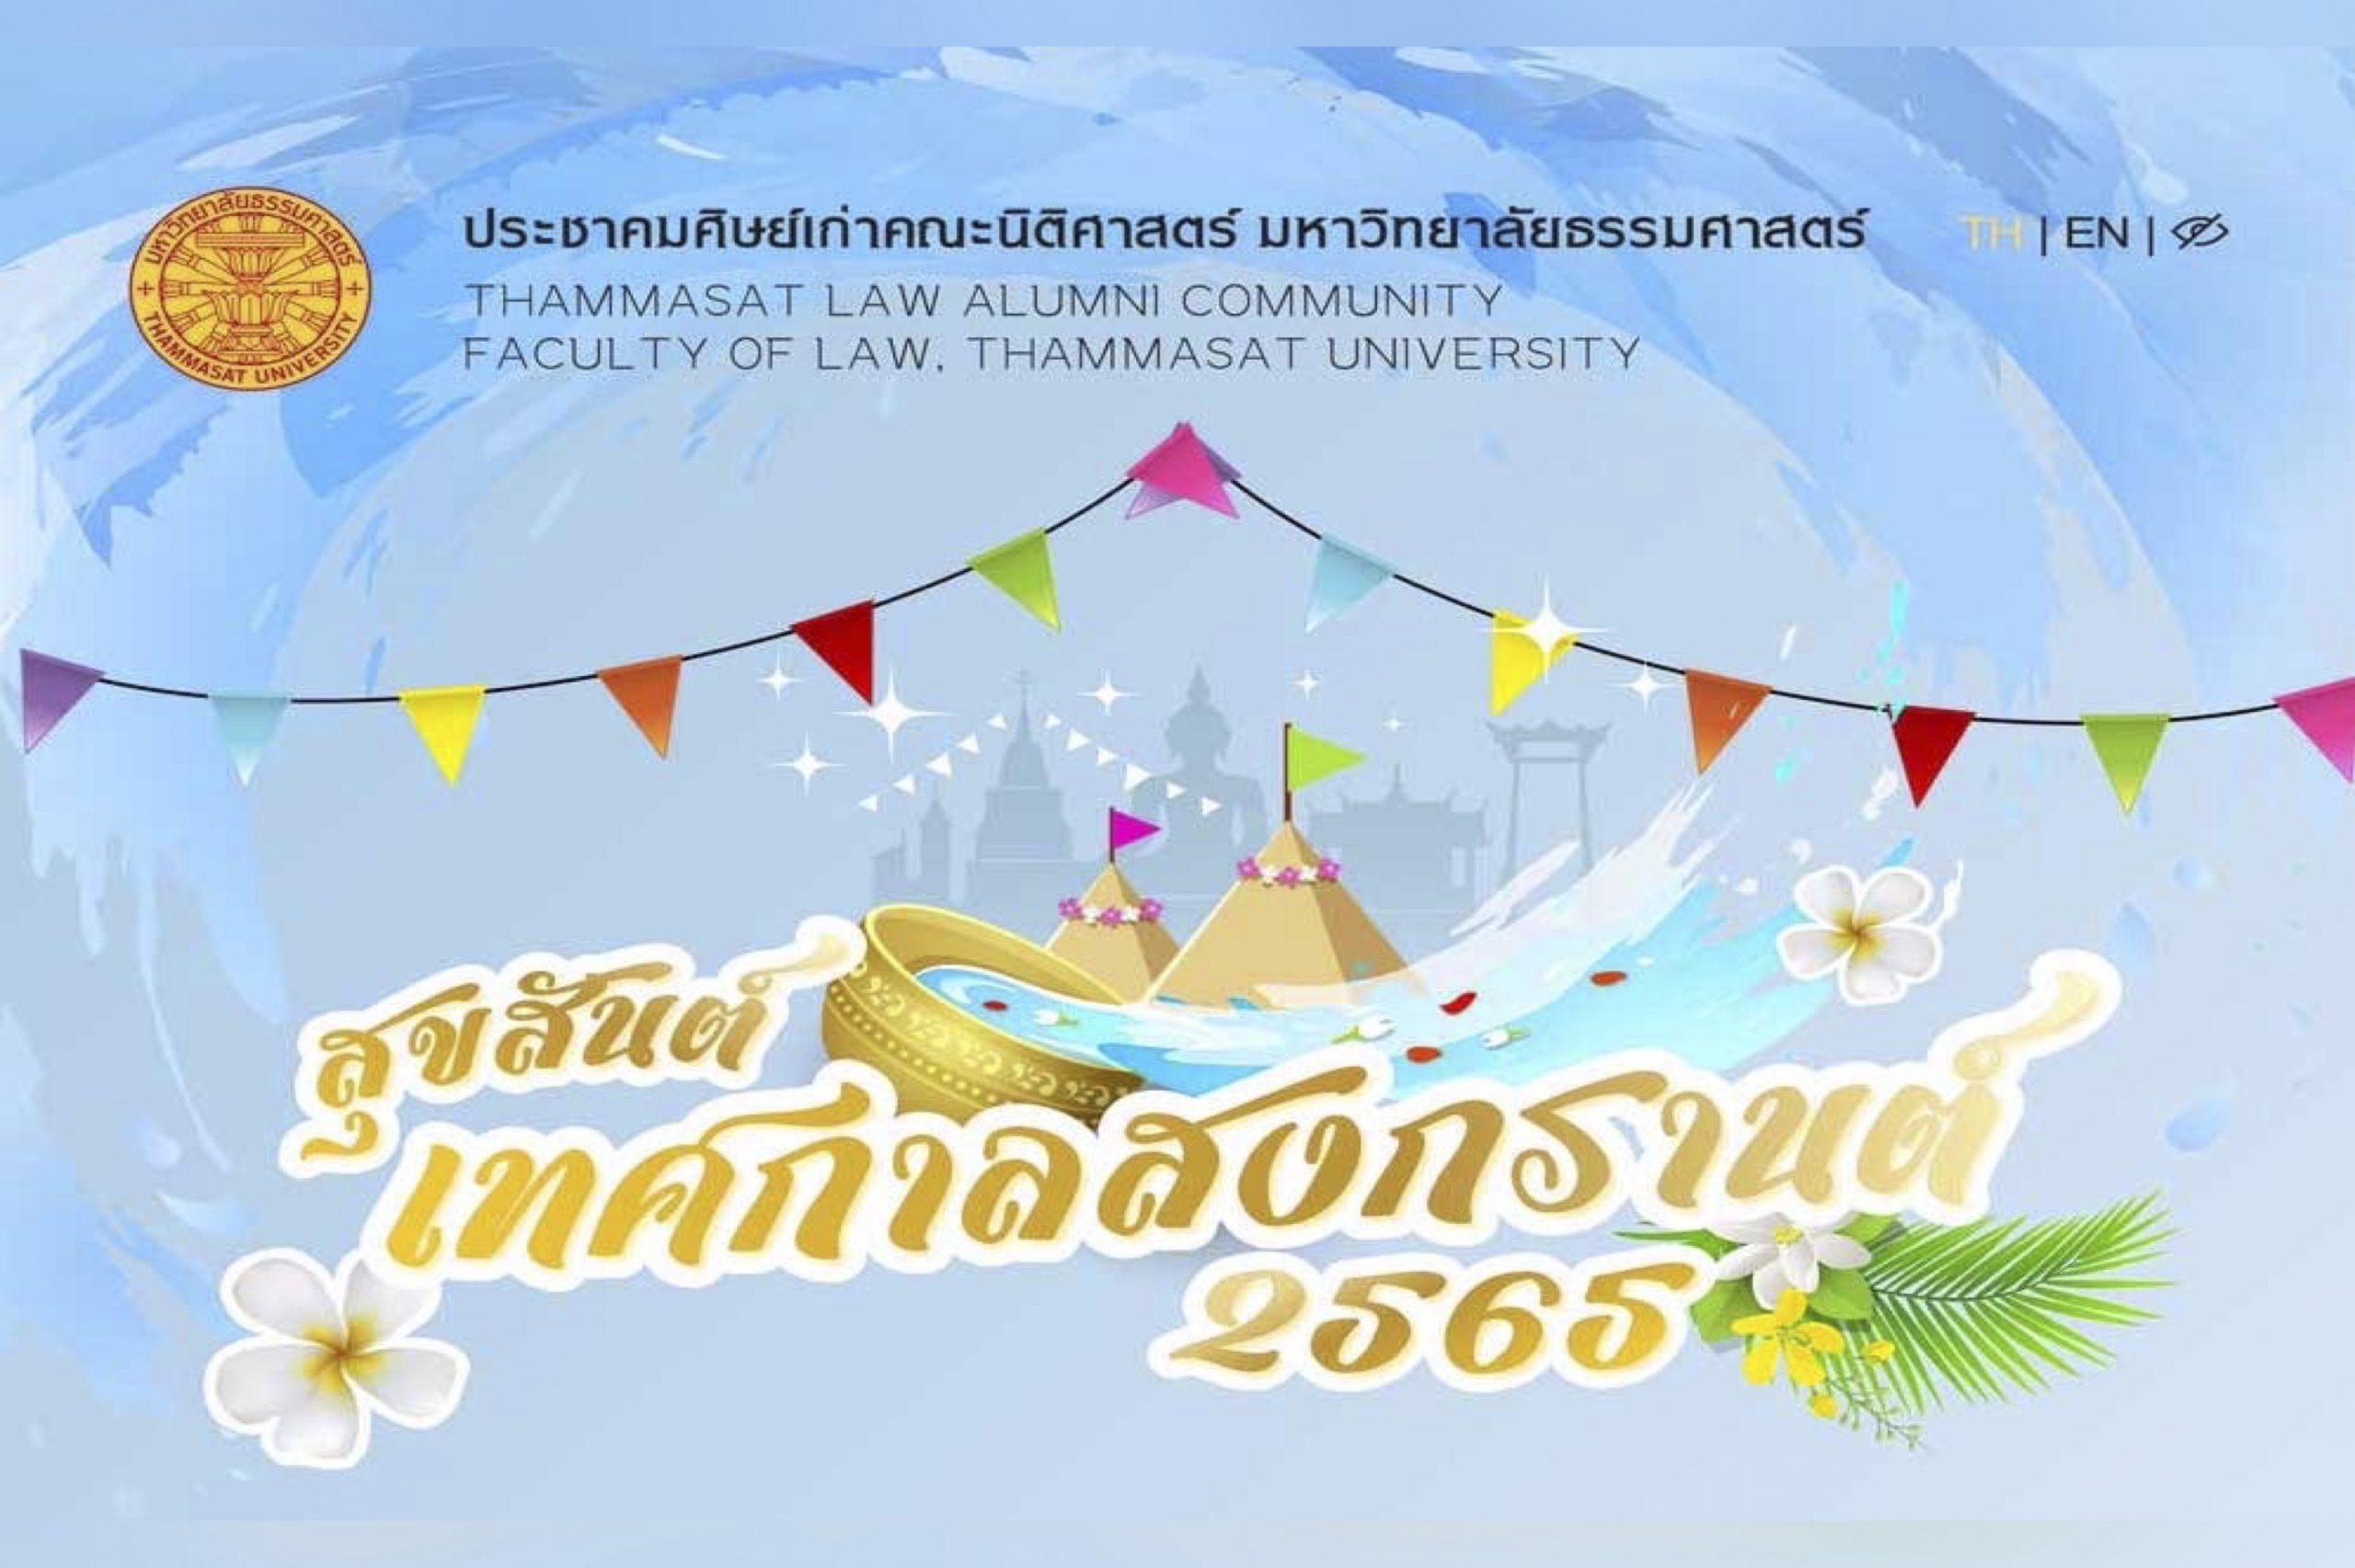 Our Law Alumni Email Special has been released! Happy Songkran Festival 2022